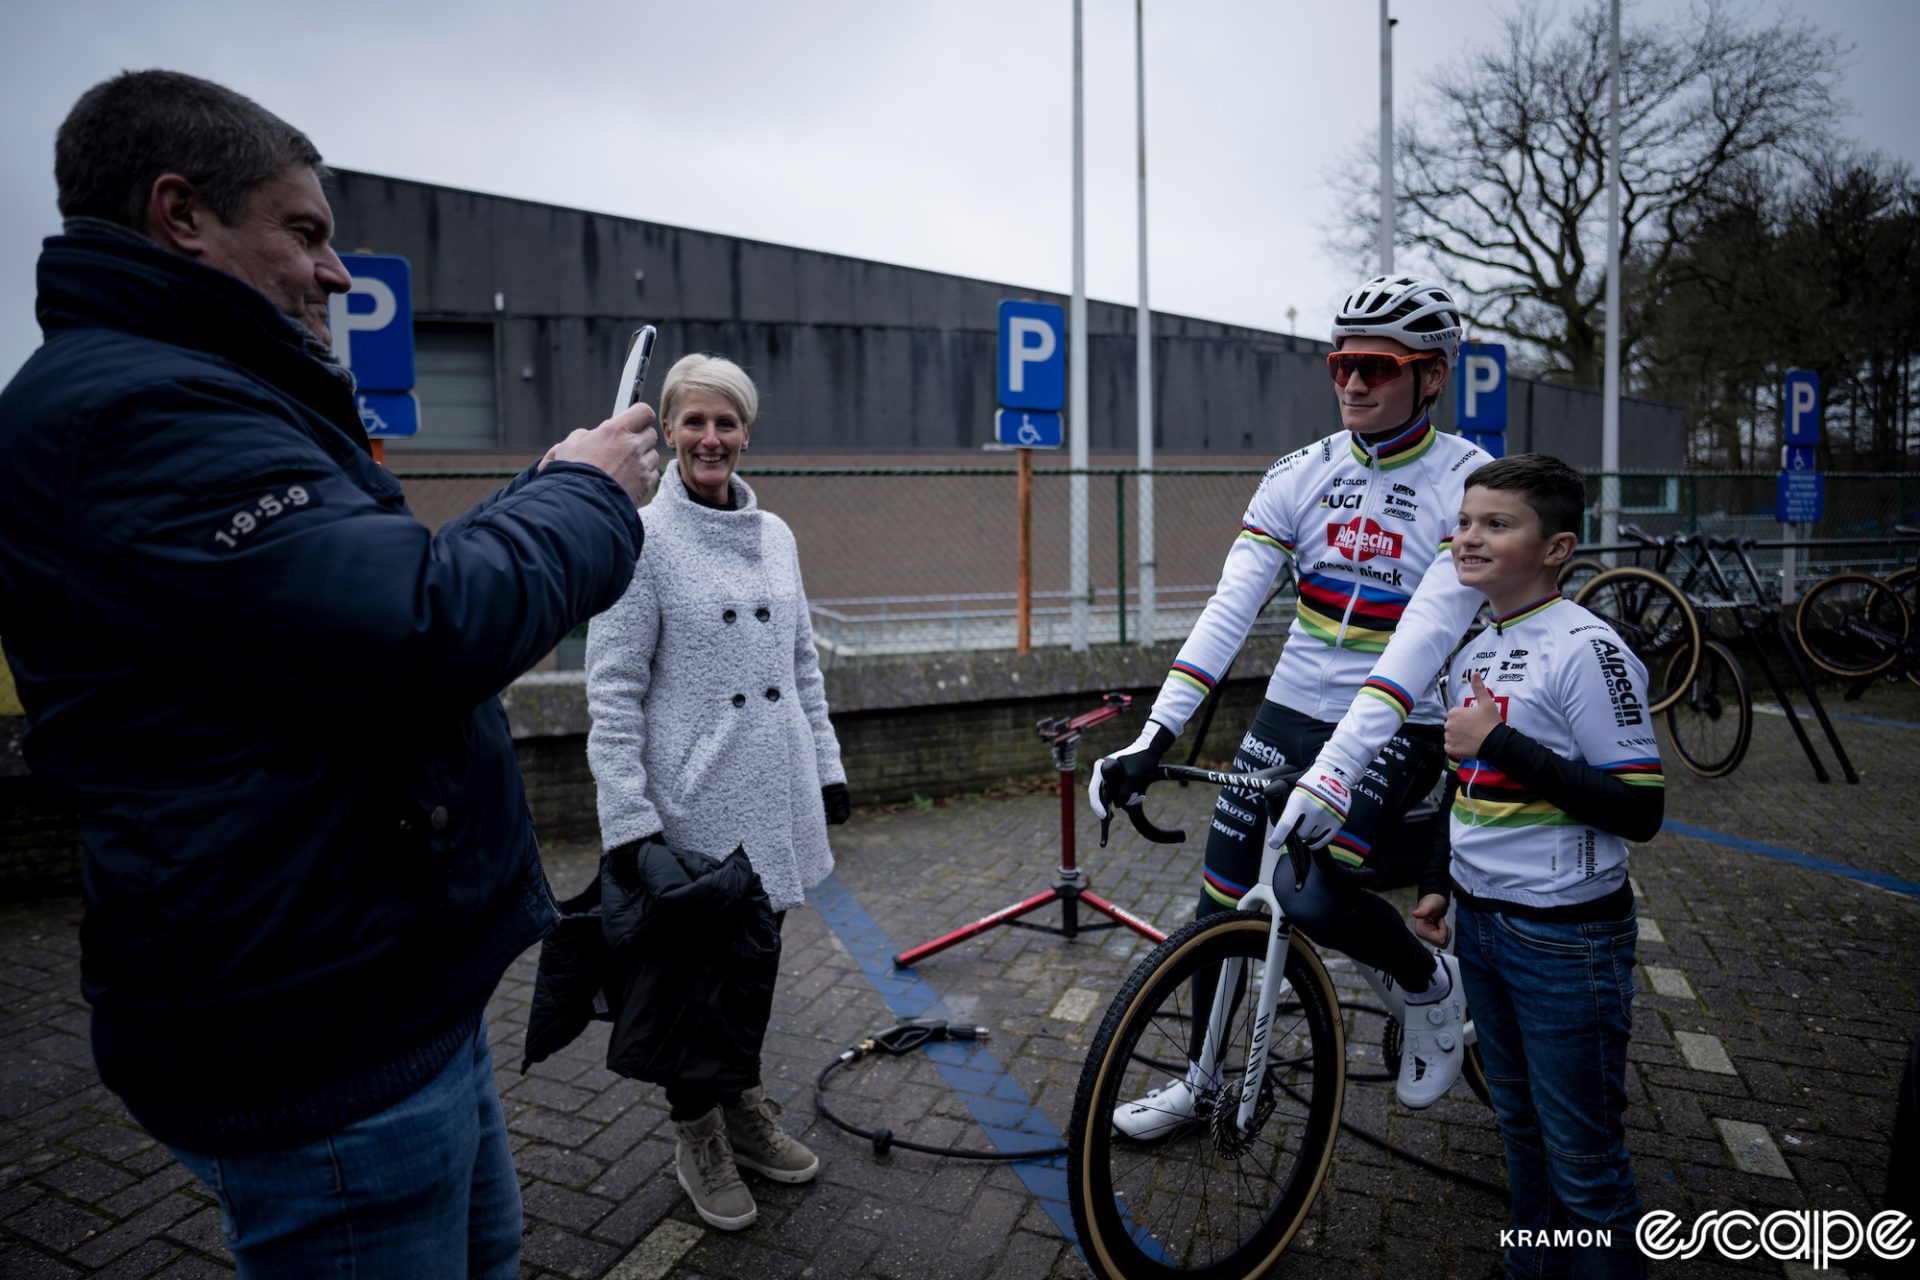 Mathieu van der Poel poses with a young fan at a cyclocross race. The young boy is smiling and giving a thumbs up for his father who is taking a cell phone photo.